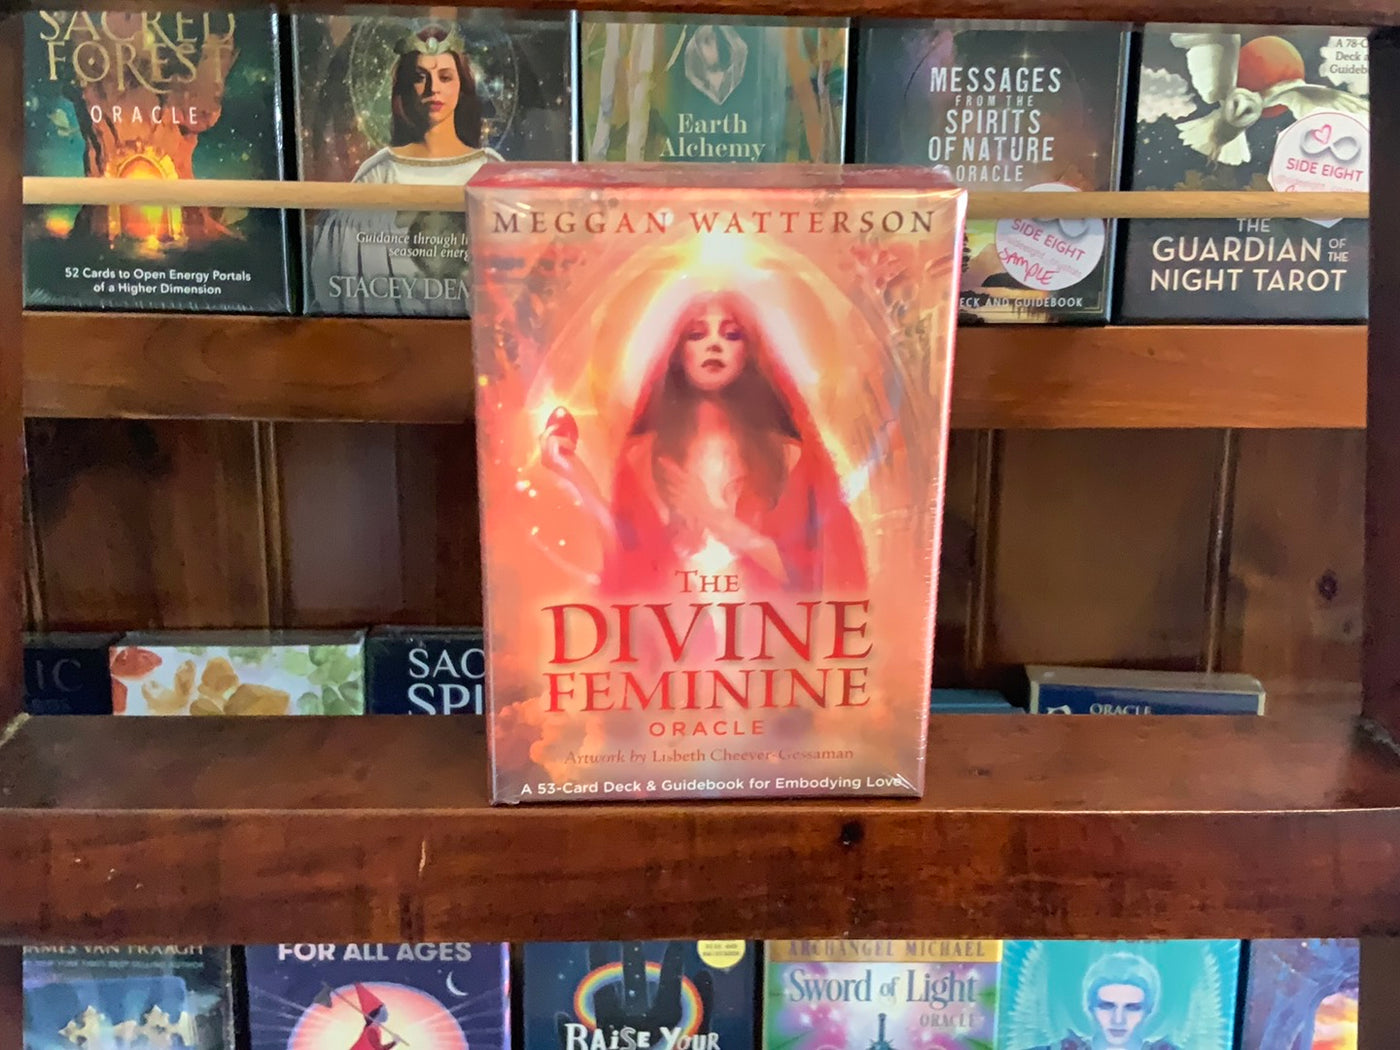 Divine Feminine Oracle The A 53-Card Deck & Guidebook for Embodying Love